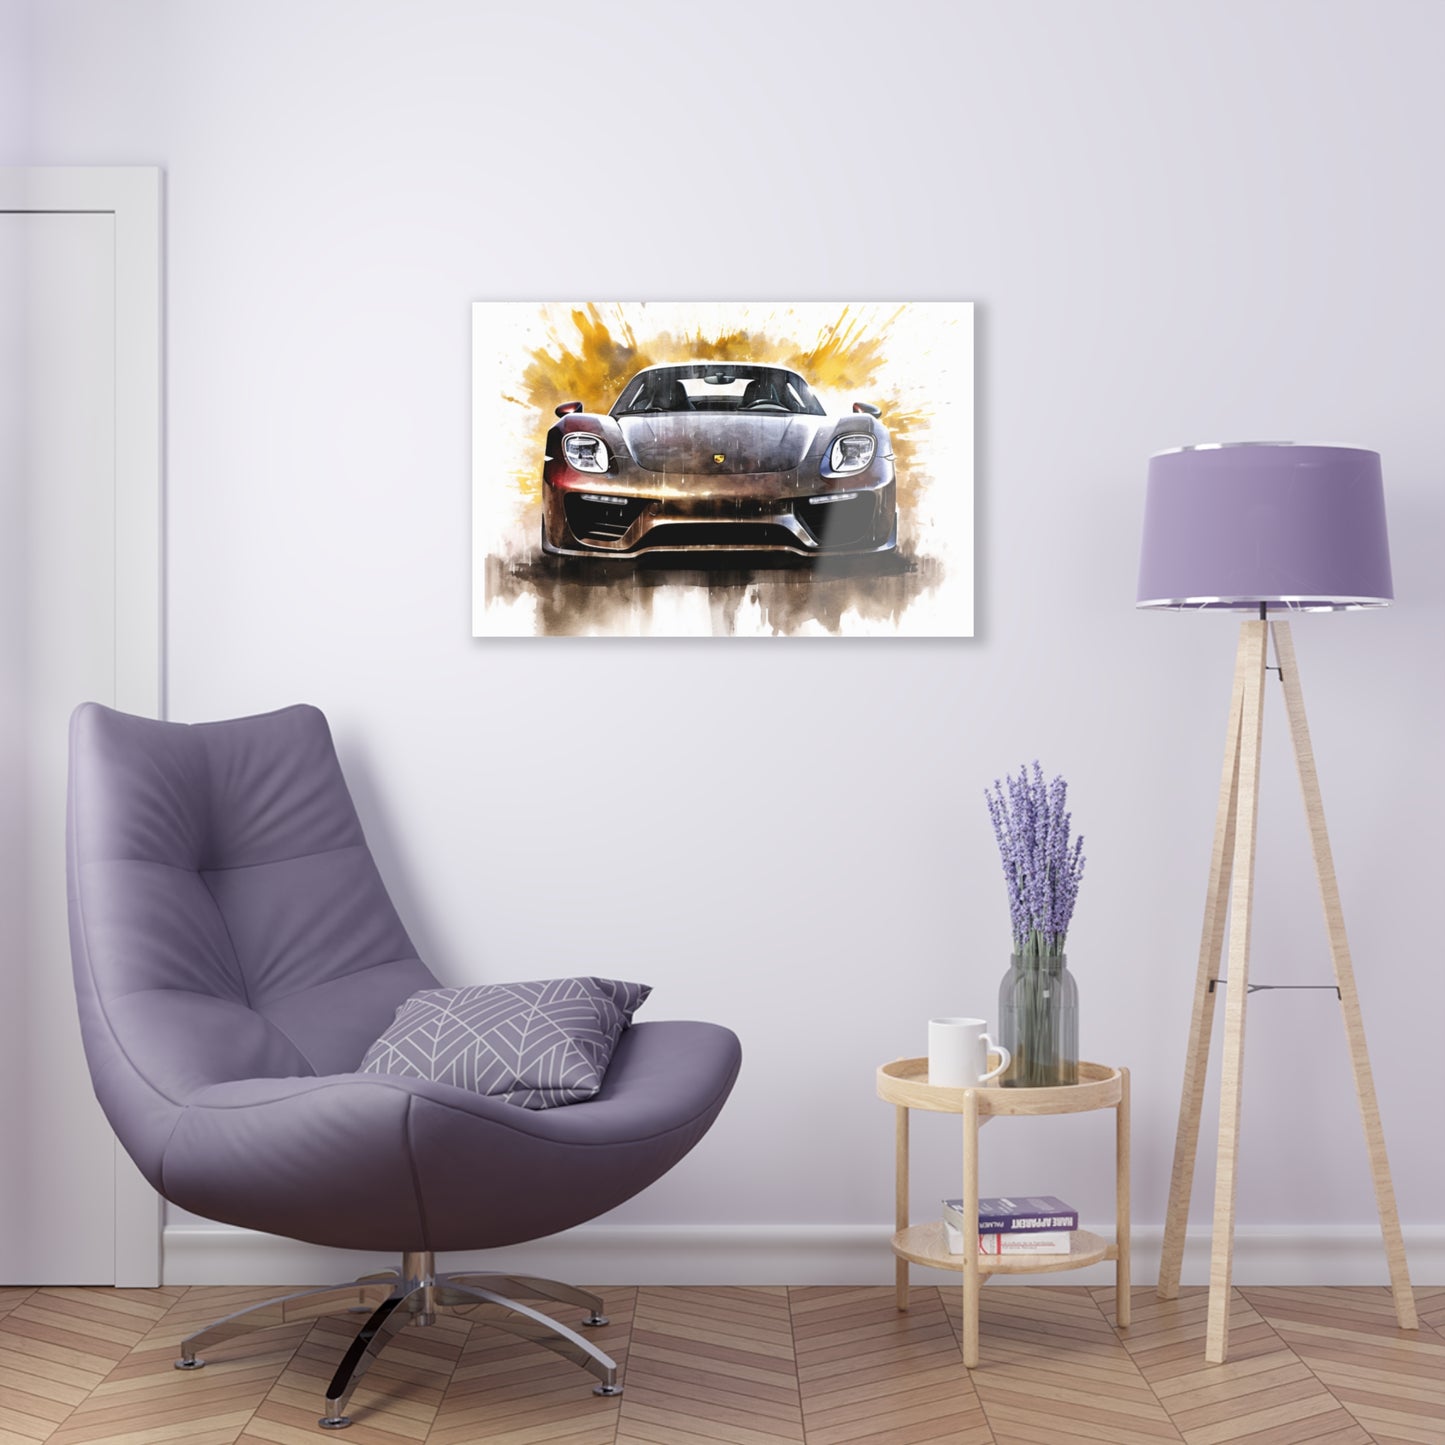 Acrylic Prints 918 Spyder white background driving fast with water splashing 1